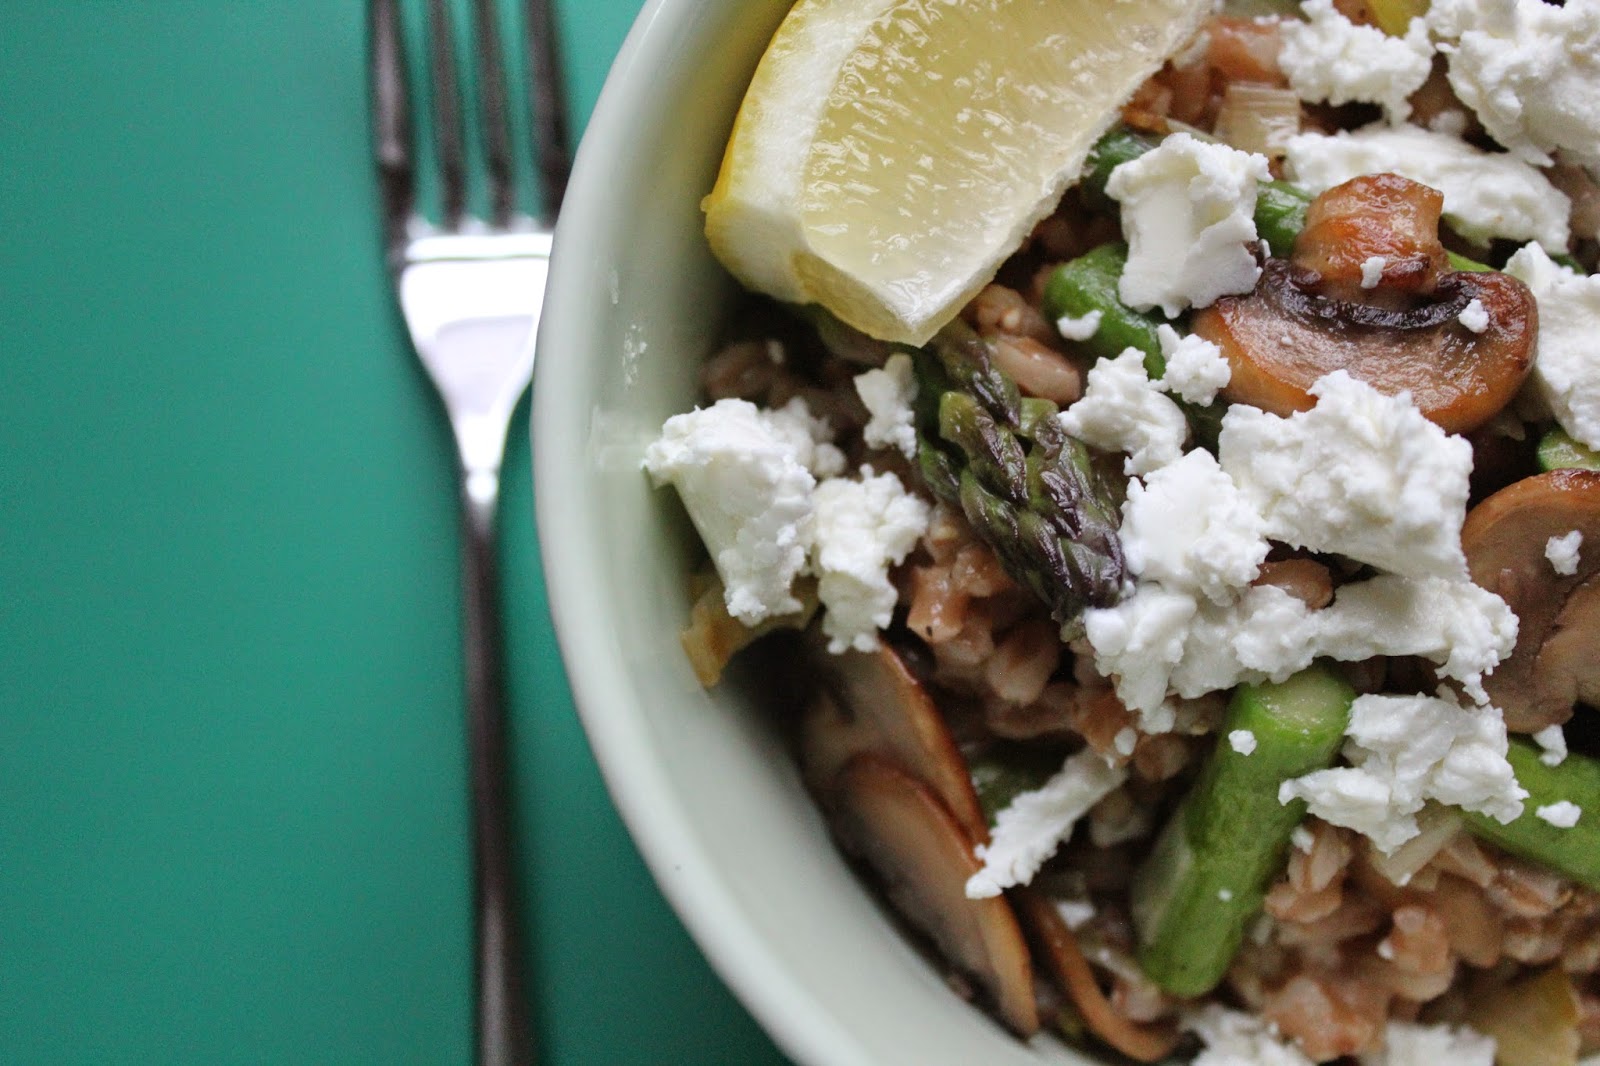 Farro "risotto" with mushrooms, asparagus, and goat cheese